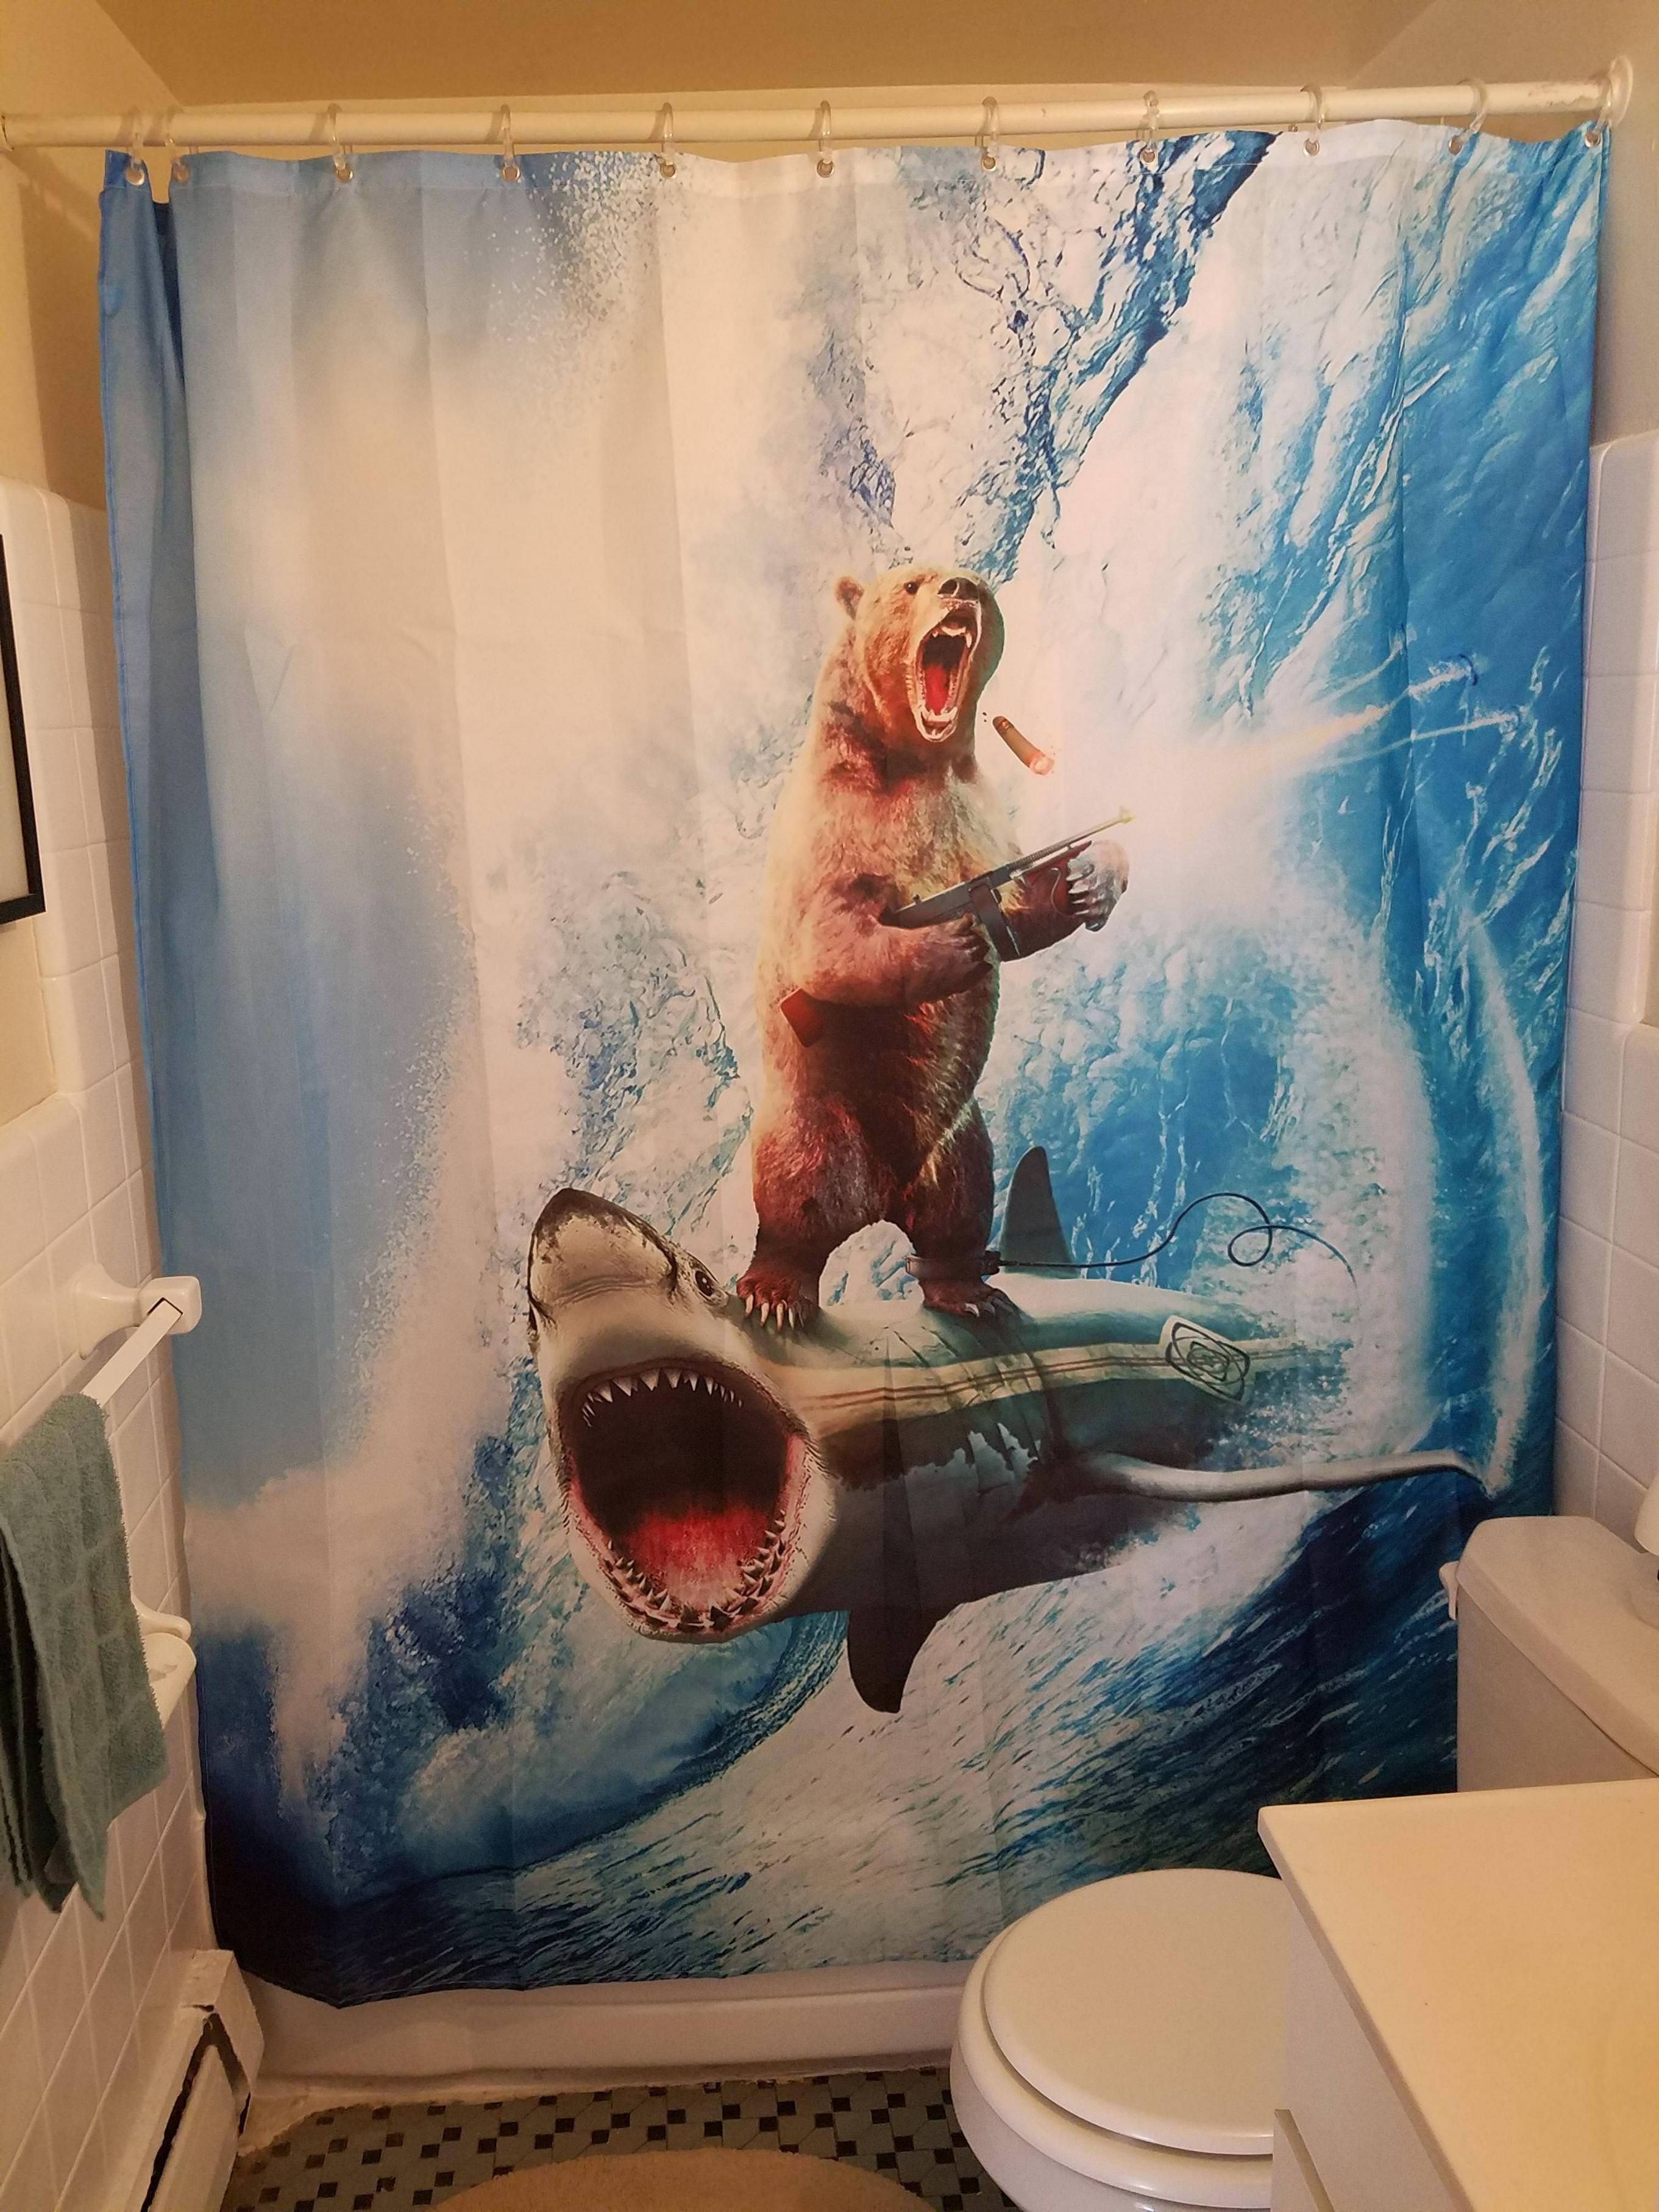 I'm single and I picked out my own shower curtain.